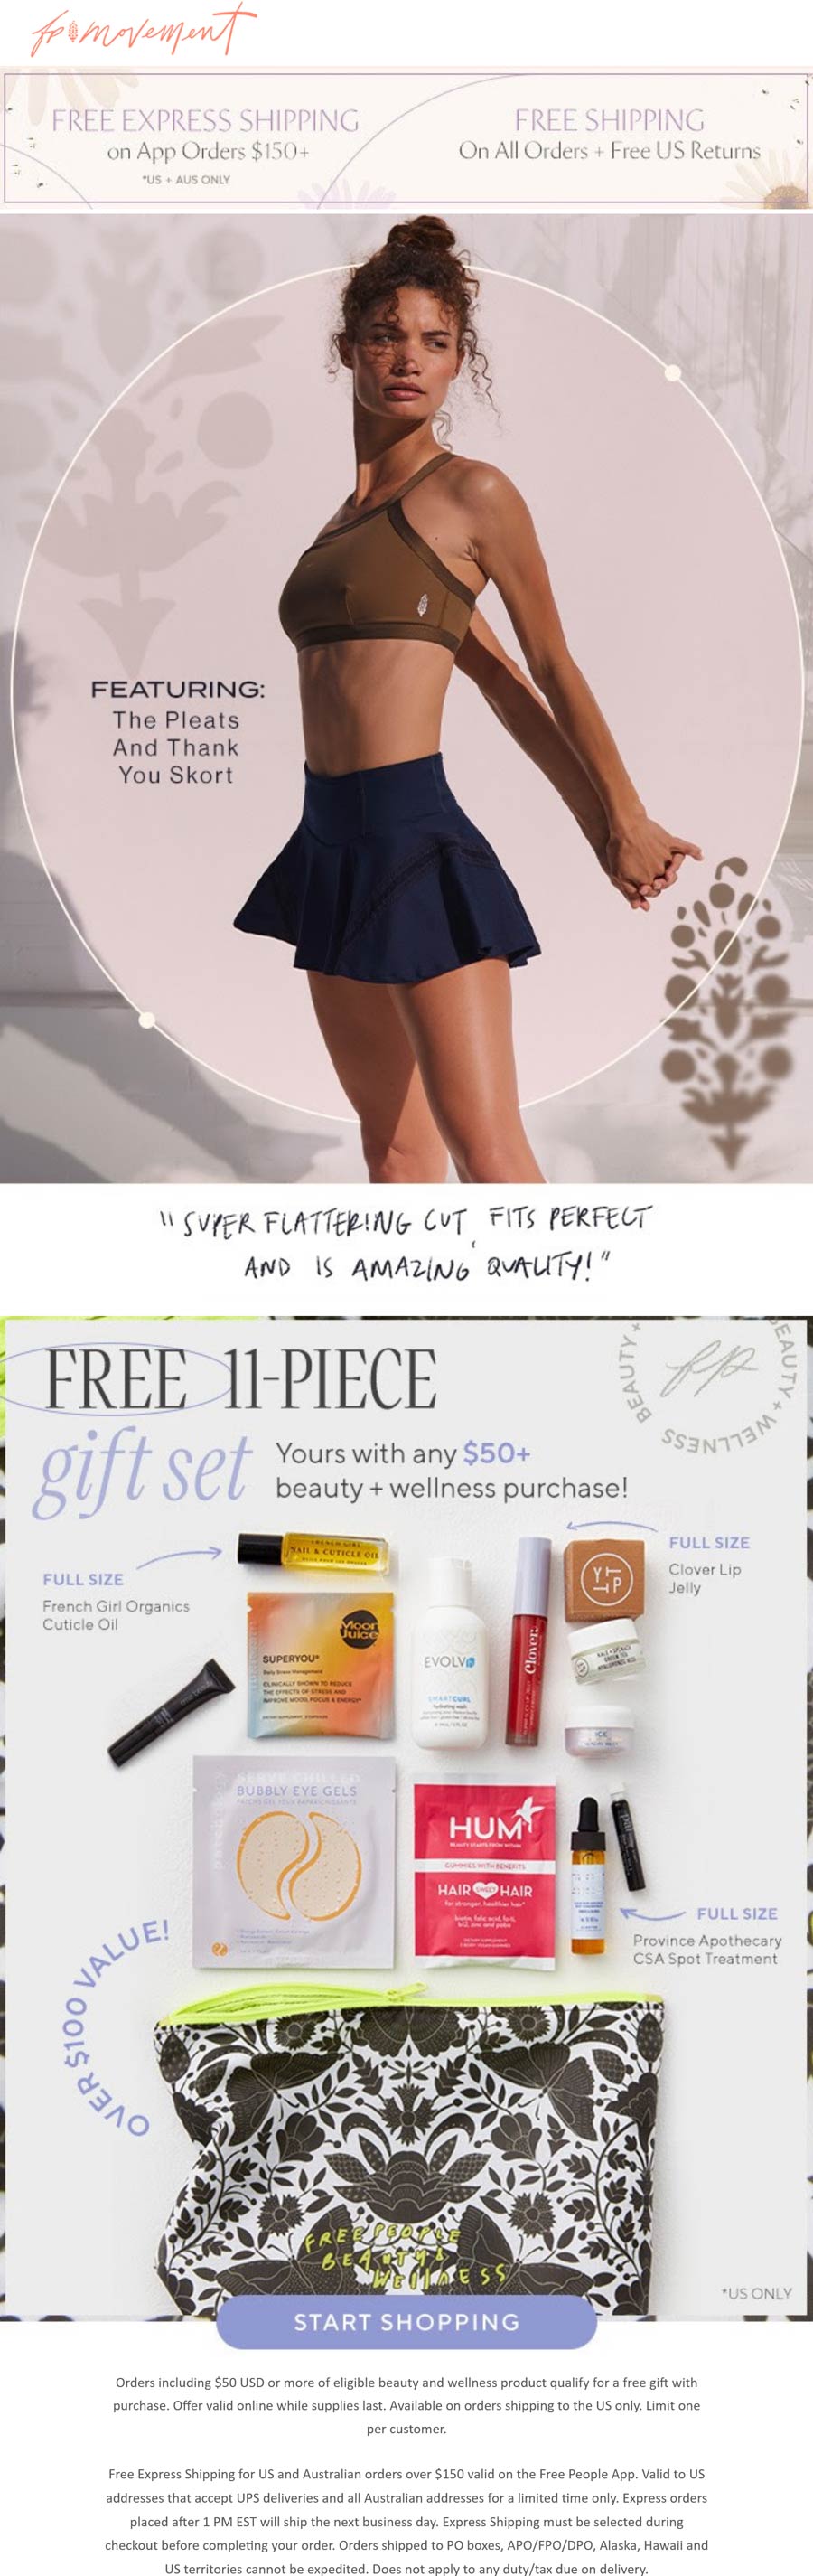 Free People coupons & promo code for [December 2022]